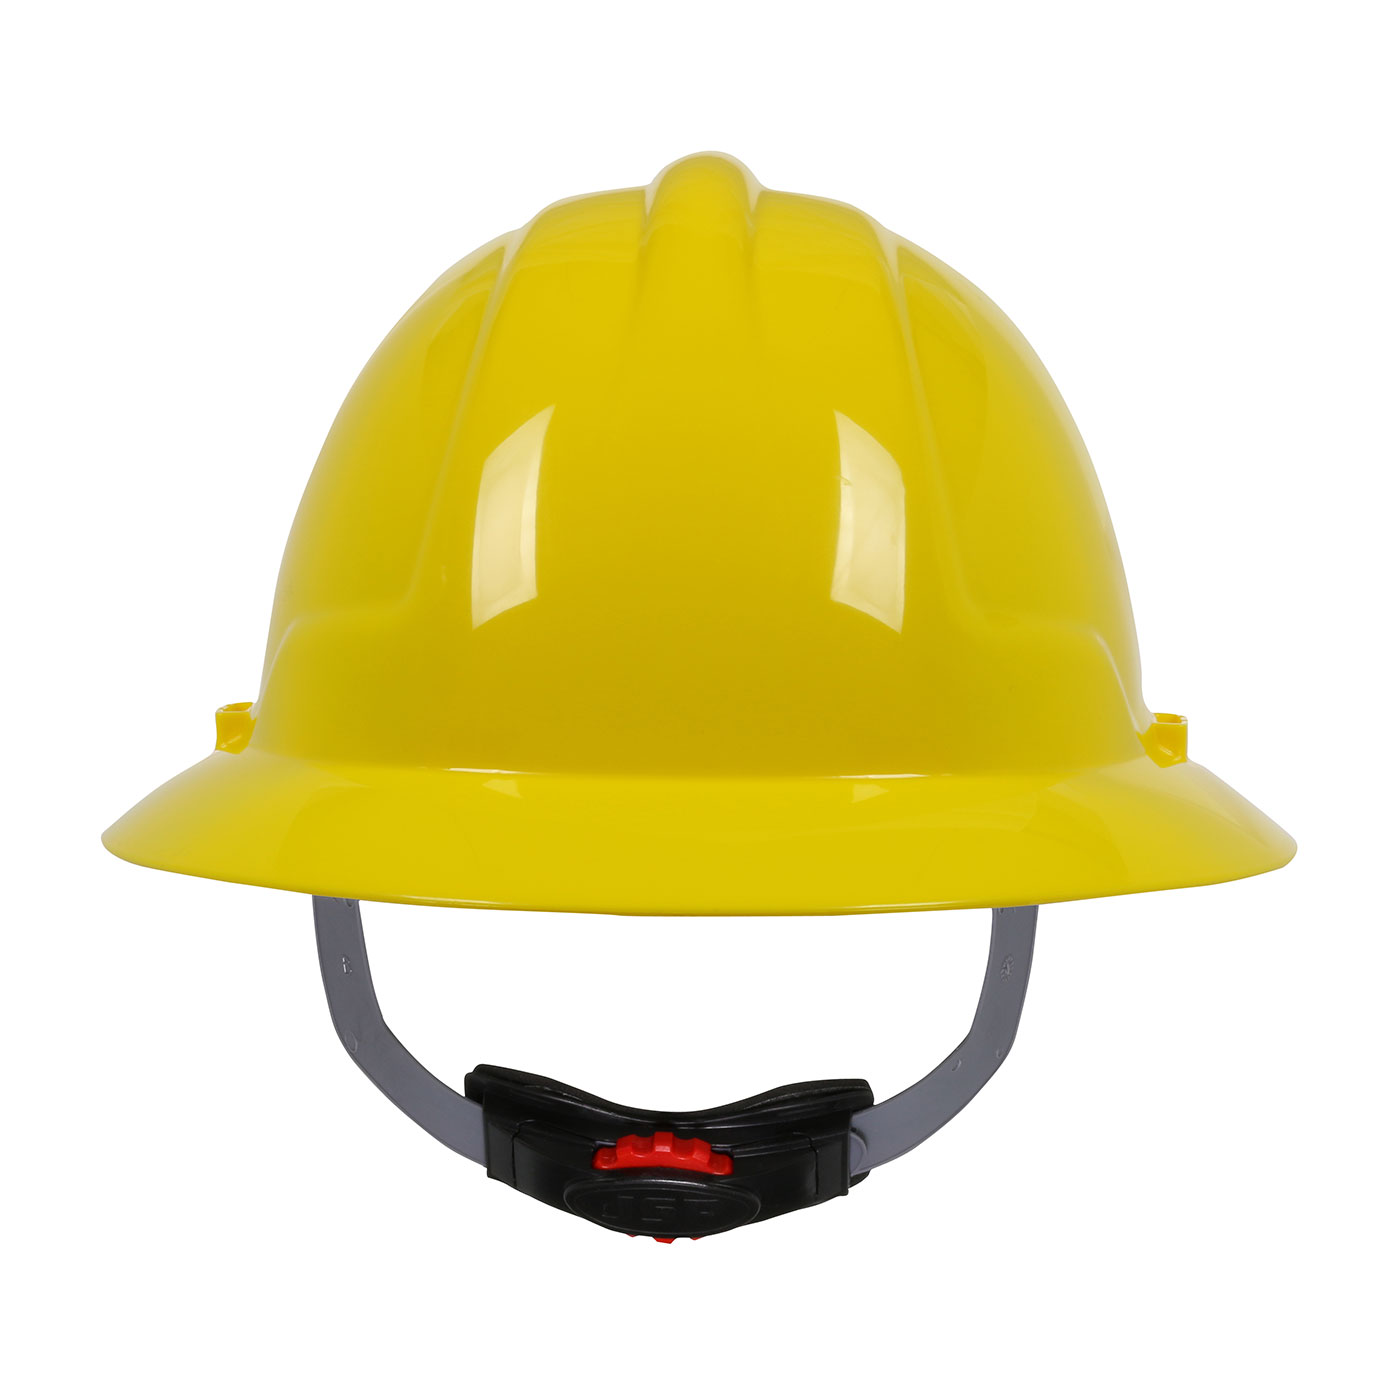 PIP® 280-FBW4200-20 Full Brim Non-Vented Hard Hat With HDPE Shell, SZ 6-5/8 Fits Mini Hat, SZ 8 Fits Max Hat, Cotton/HDPE/Polyester, 4-Point Polyester Textile Suspension, ANSI Electrical Class Rating: Class E, ANSI Impact Rating: ANSI/ISEA Z89.1 Type I